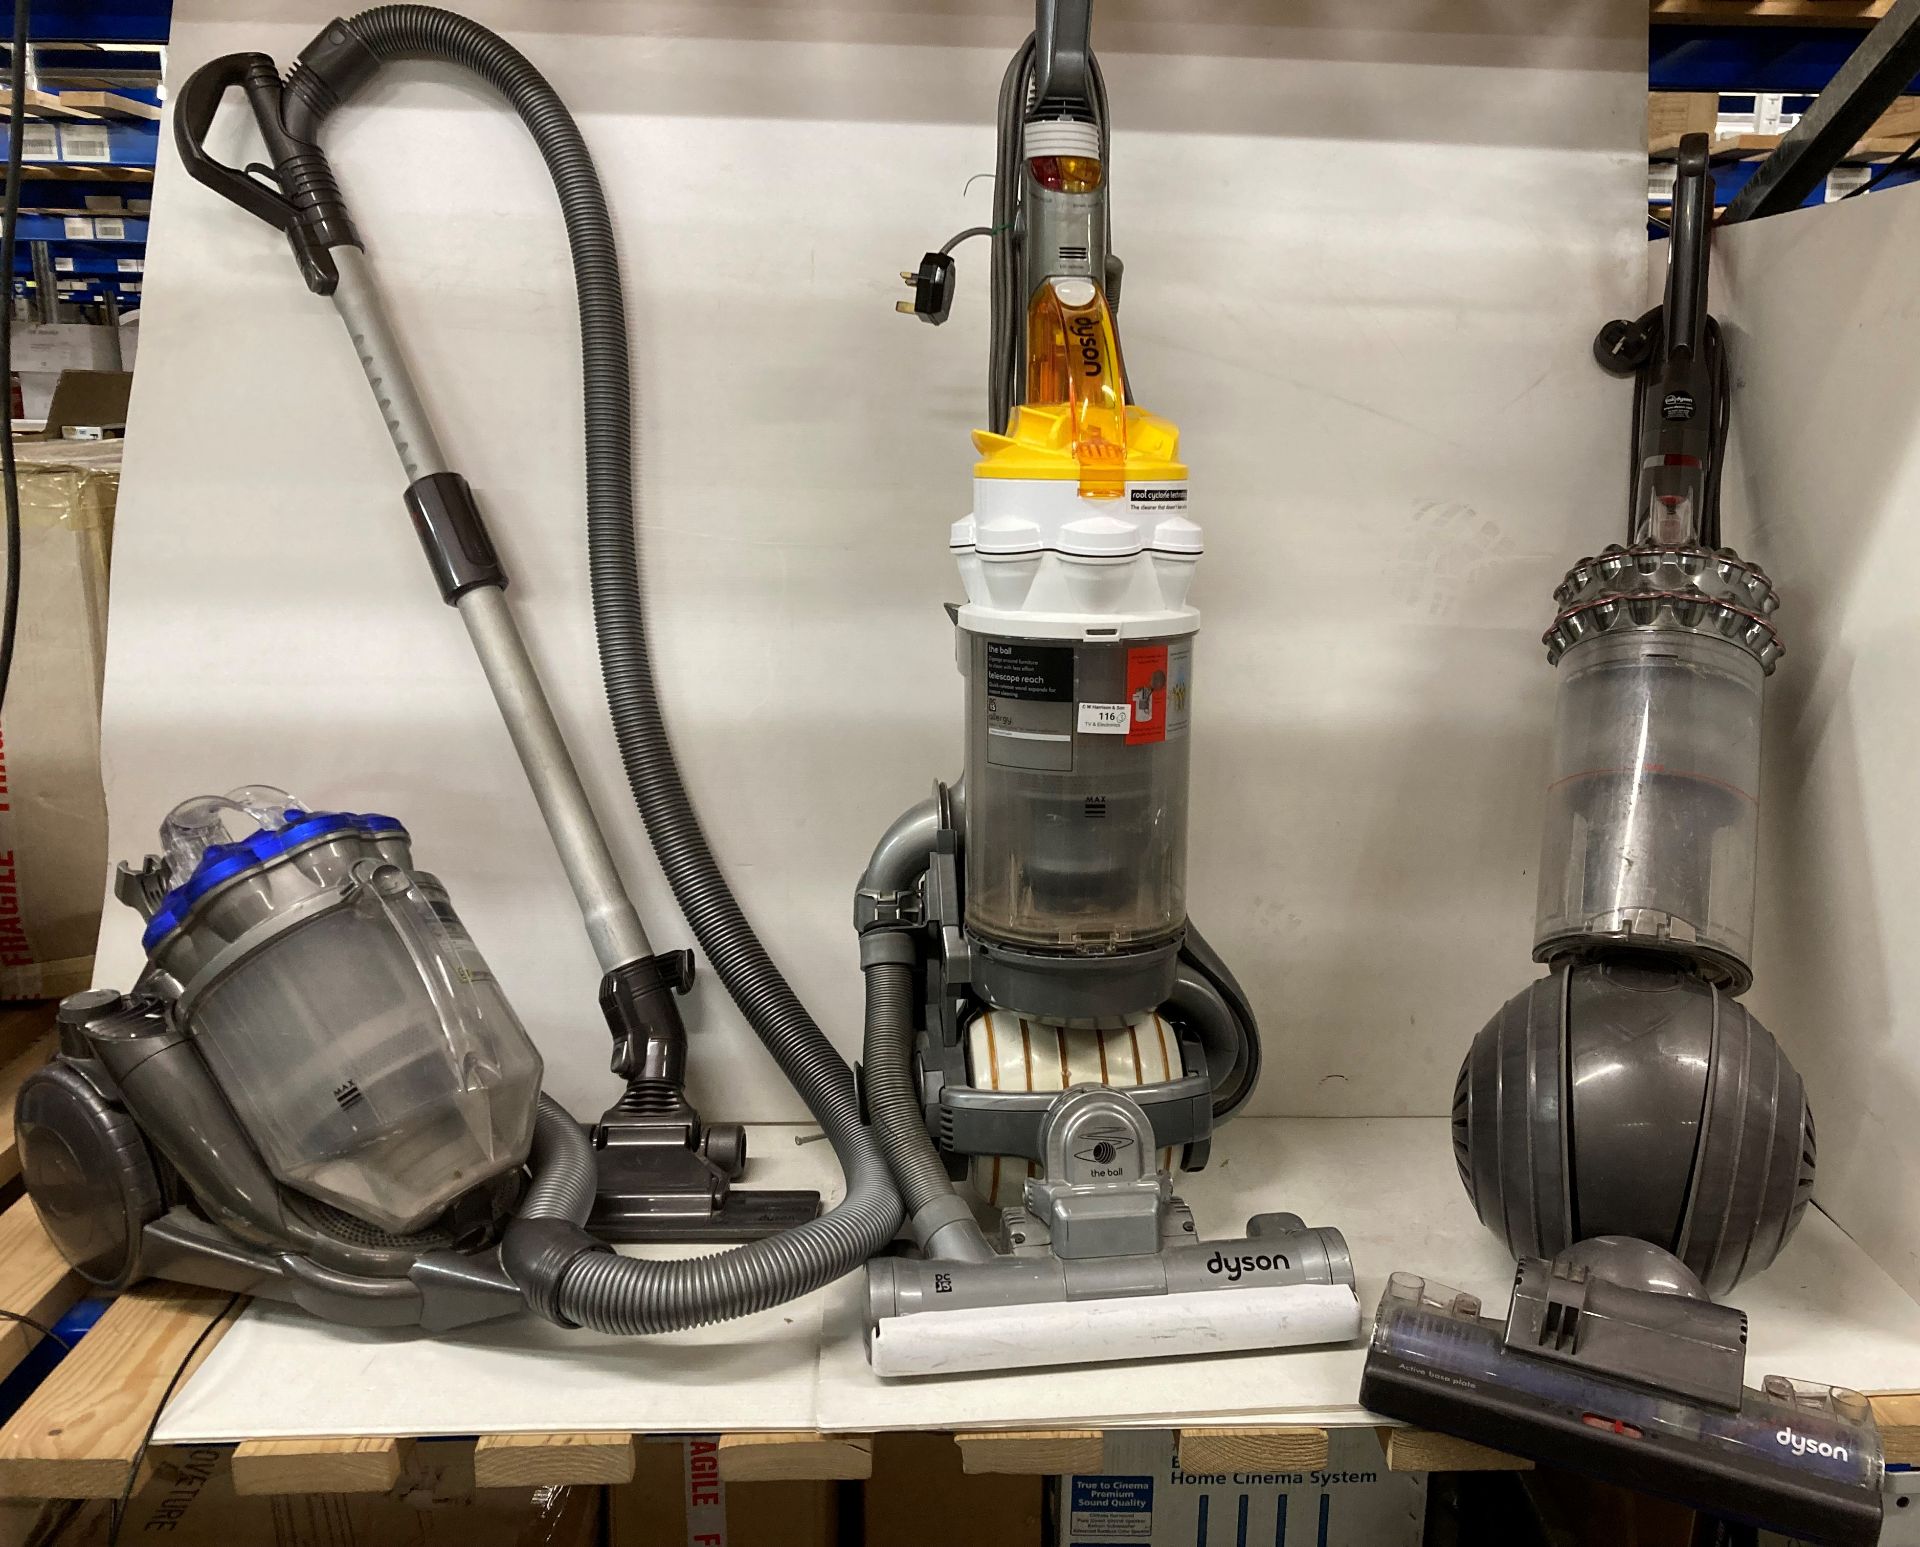 3 x Dyson upright and cylinder vacuums (saleroom location: J12 FLOOR) Further Information